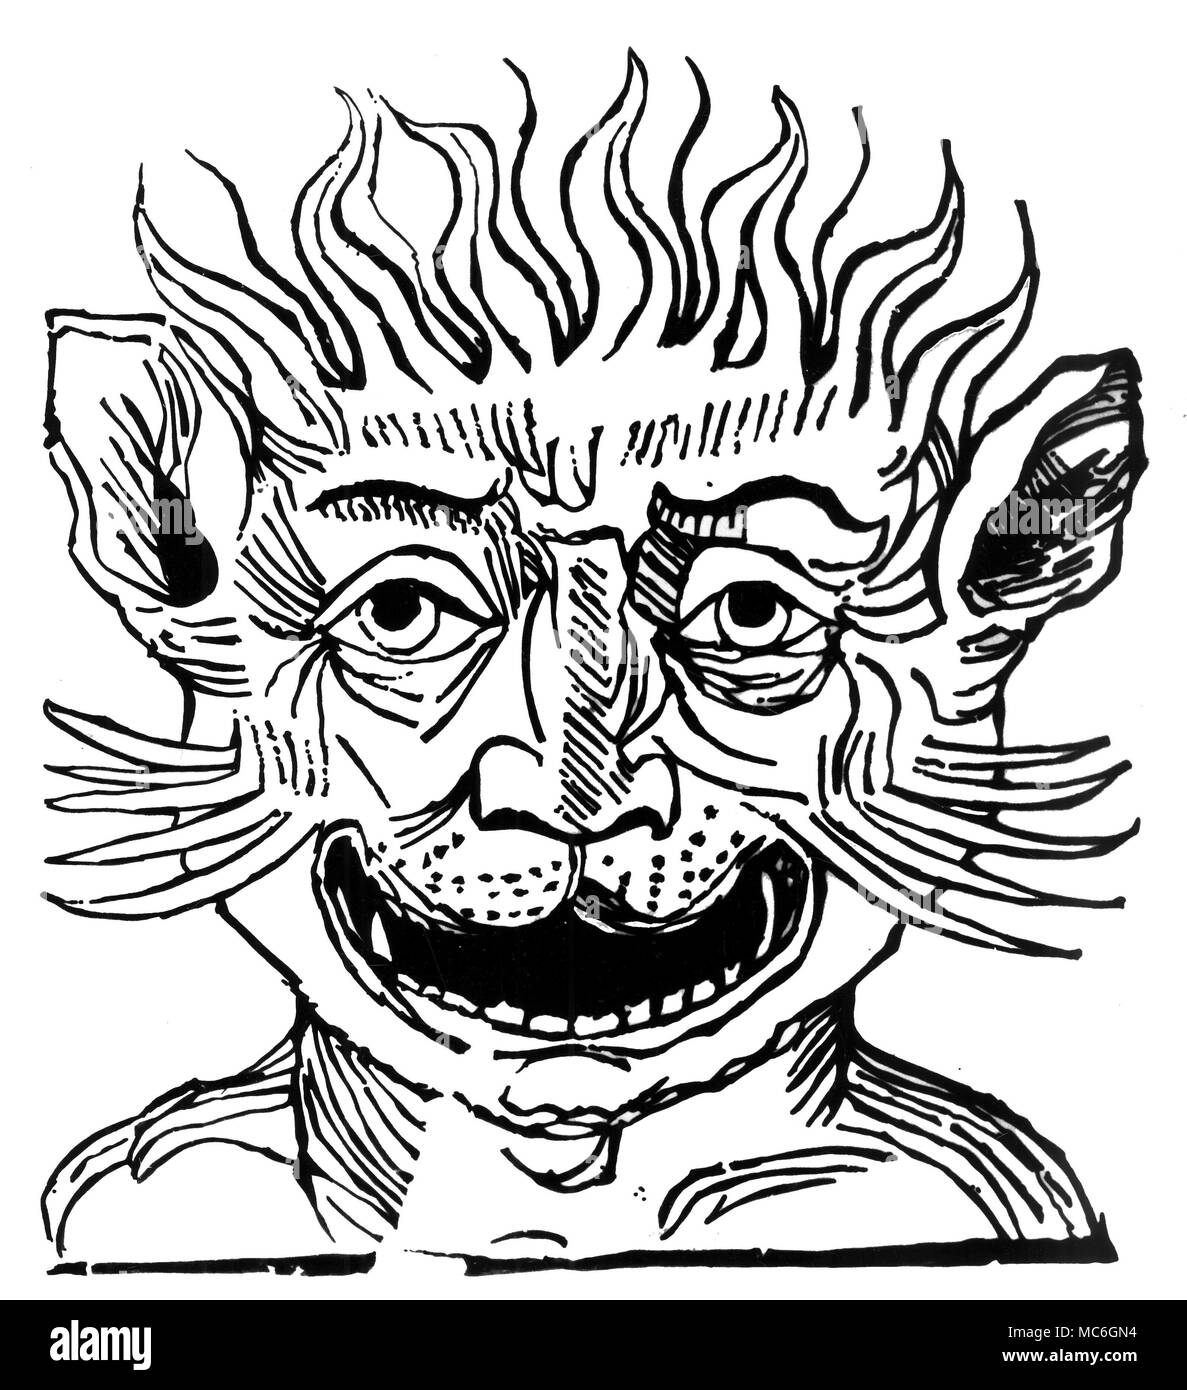 Demons, Head of Devil from Mandeville's Travels. Stock Photo